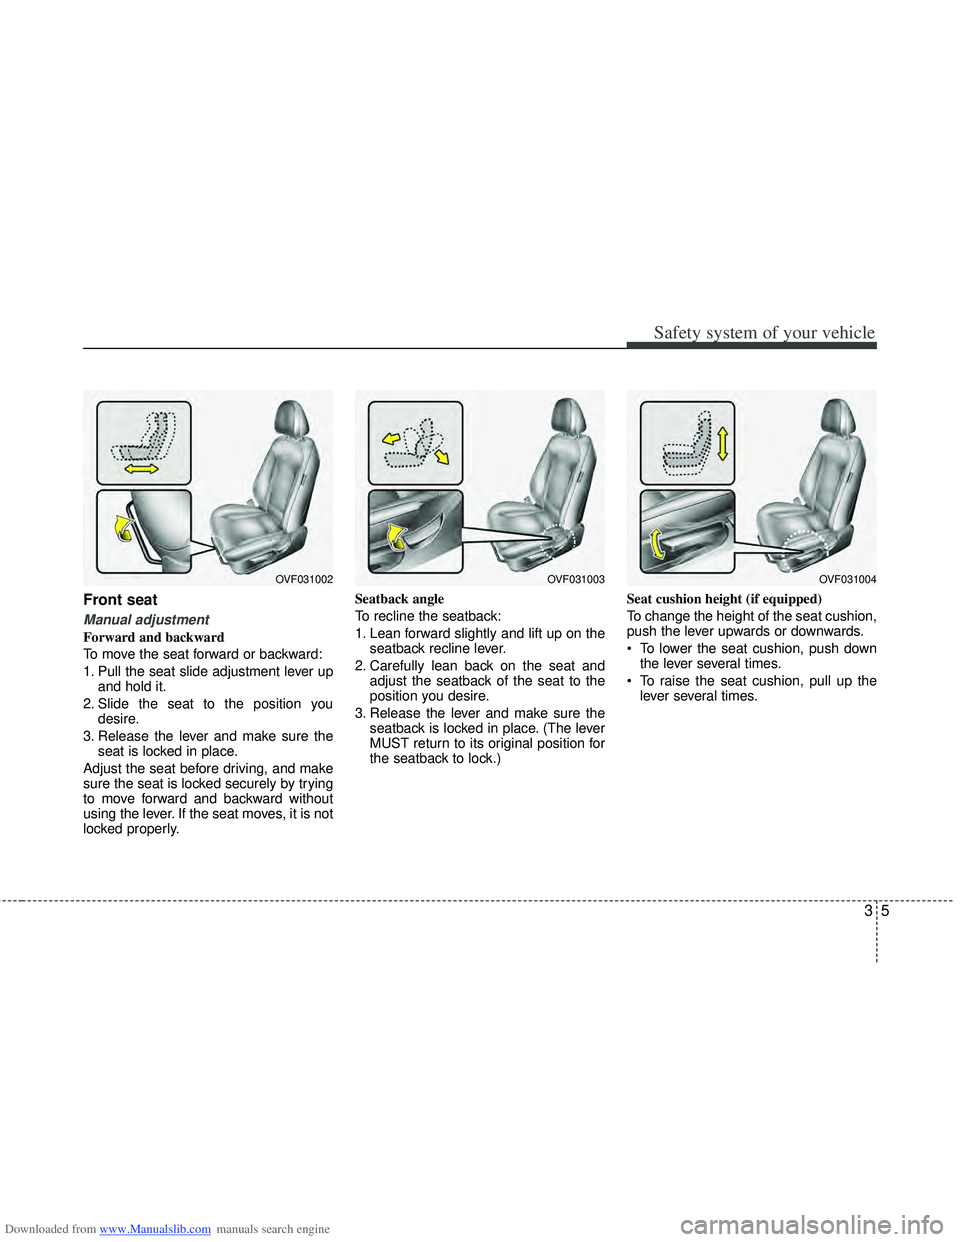 HYUNDAI I40 2018  Owners Manual Downloaded from www.Manualslib.com manuals search engine 35
Safety system of your vehicle
Front seat 
Manual adjustment 
Forward and backward
To move the seat forward or backward:
1. Pull the seat sli